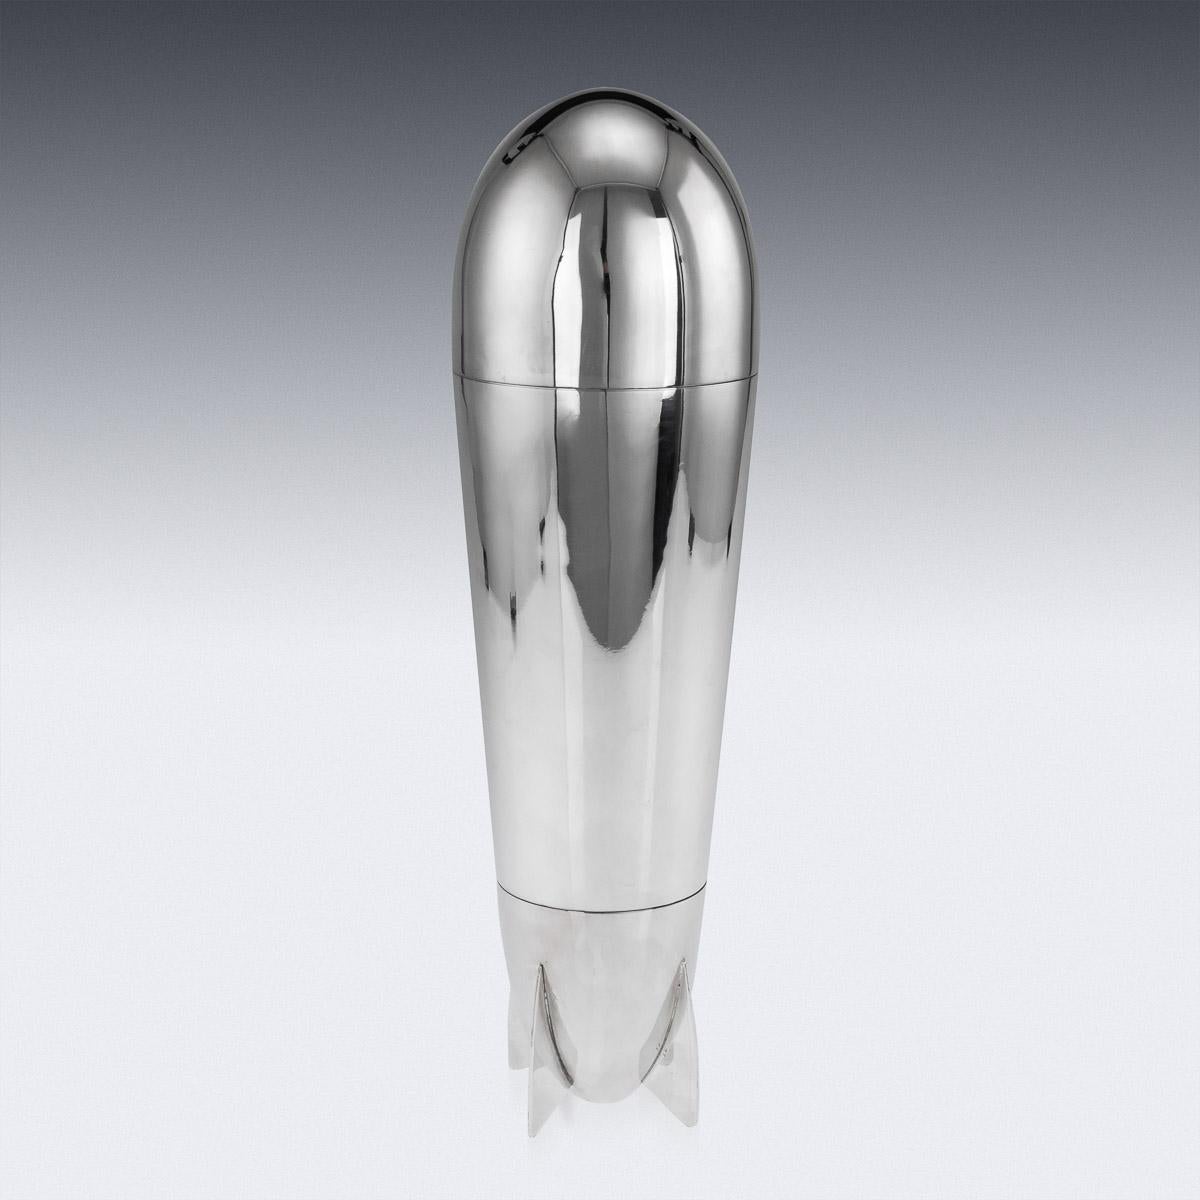 20th Century Art Deco Silver Plated Zeppelin Cocktail Shaker, c.1930 1